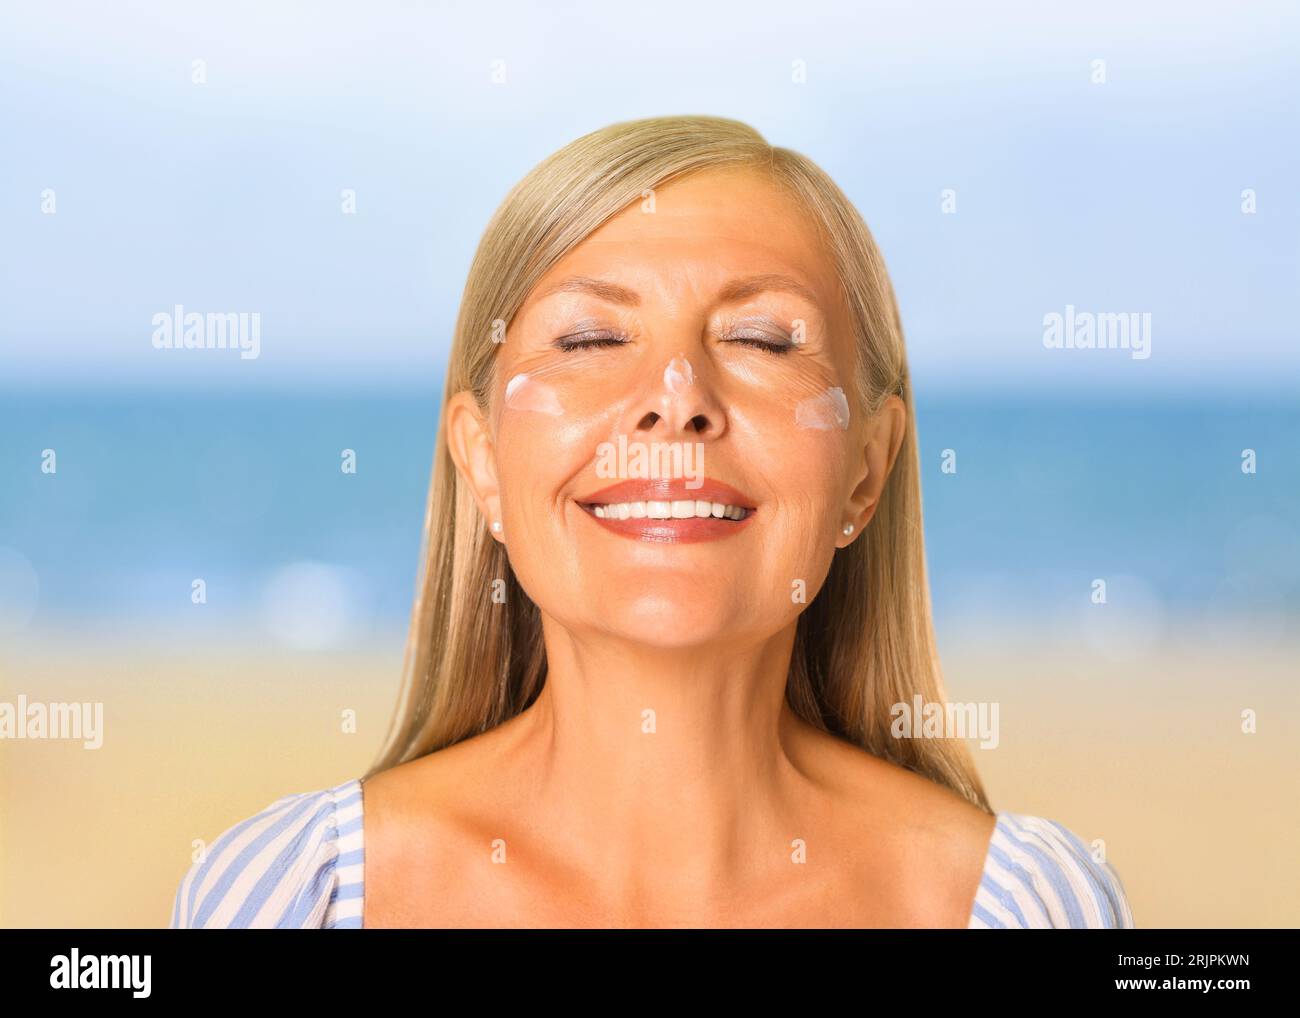 Sun protection. Beautiful young woman with sunblock on her face near sea Stock Photo